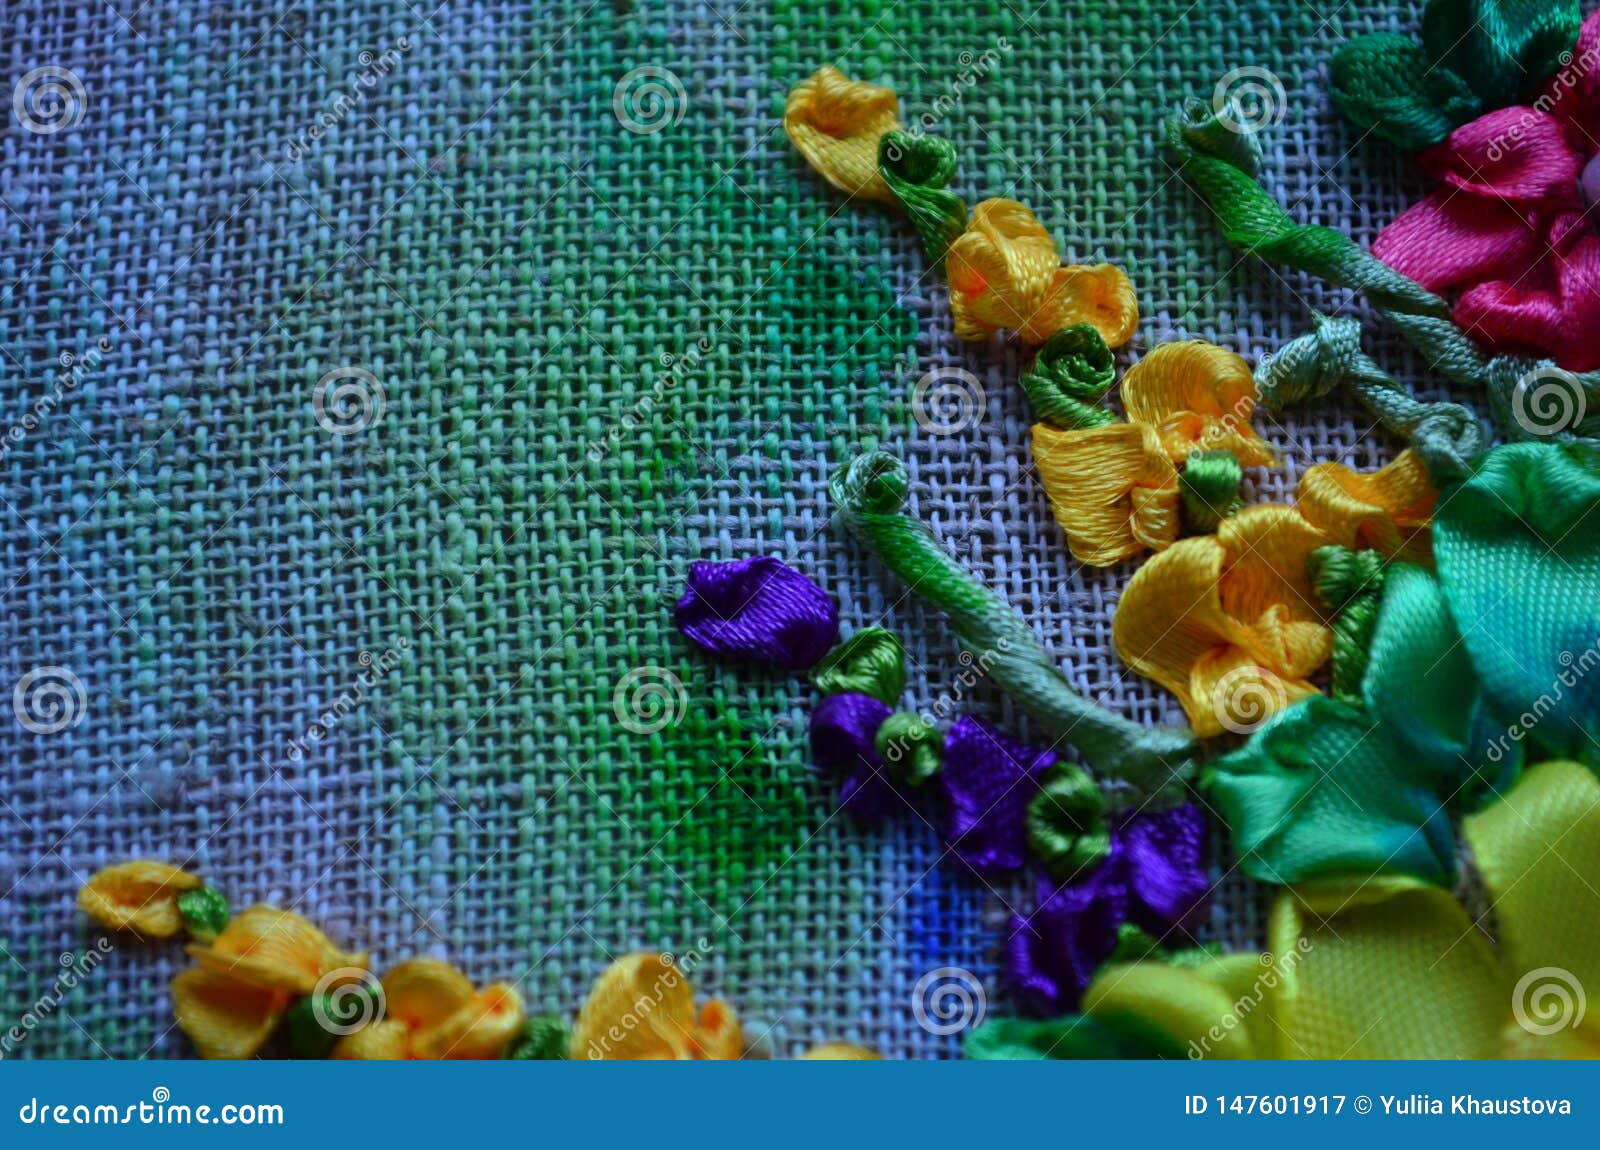 Flowers Embroidered with Color Satin Ribbons on the Fabric Stock Image ...